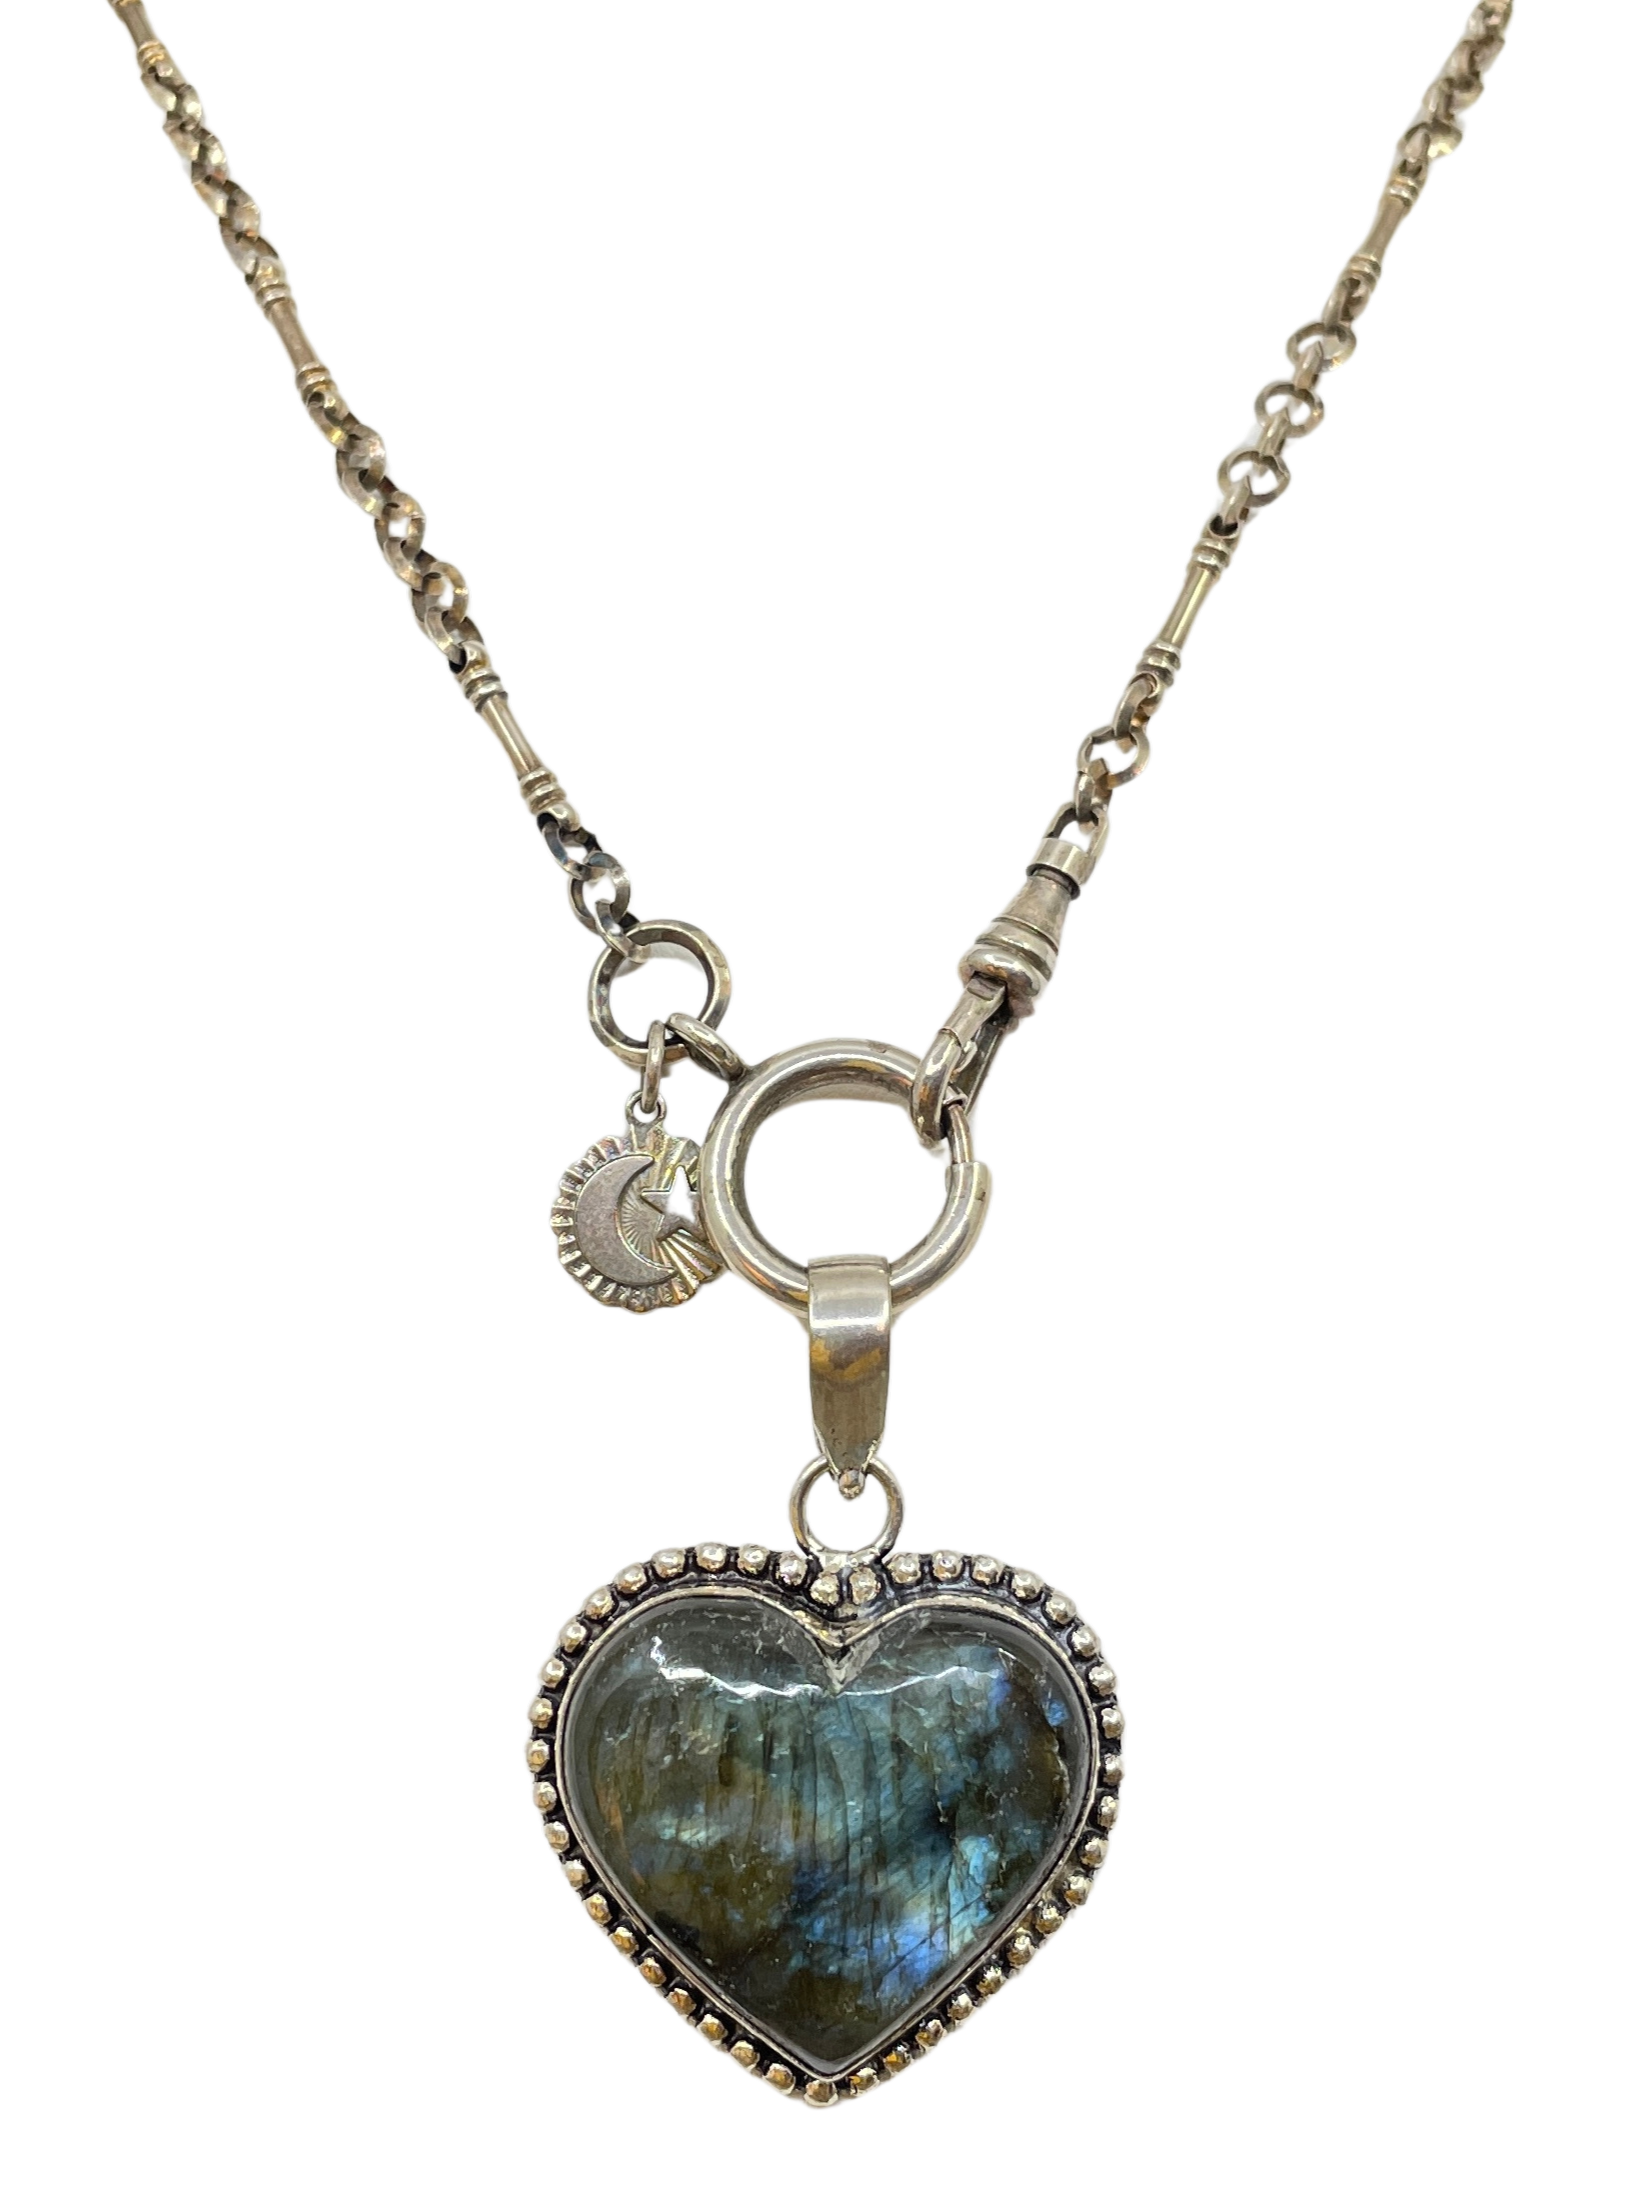 Vintage Sterling Plated Watch Chain with Sterling and Labradorite Heart Pendant